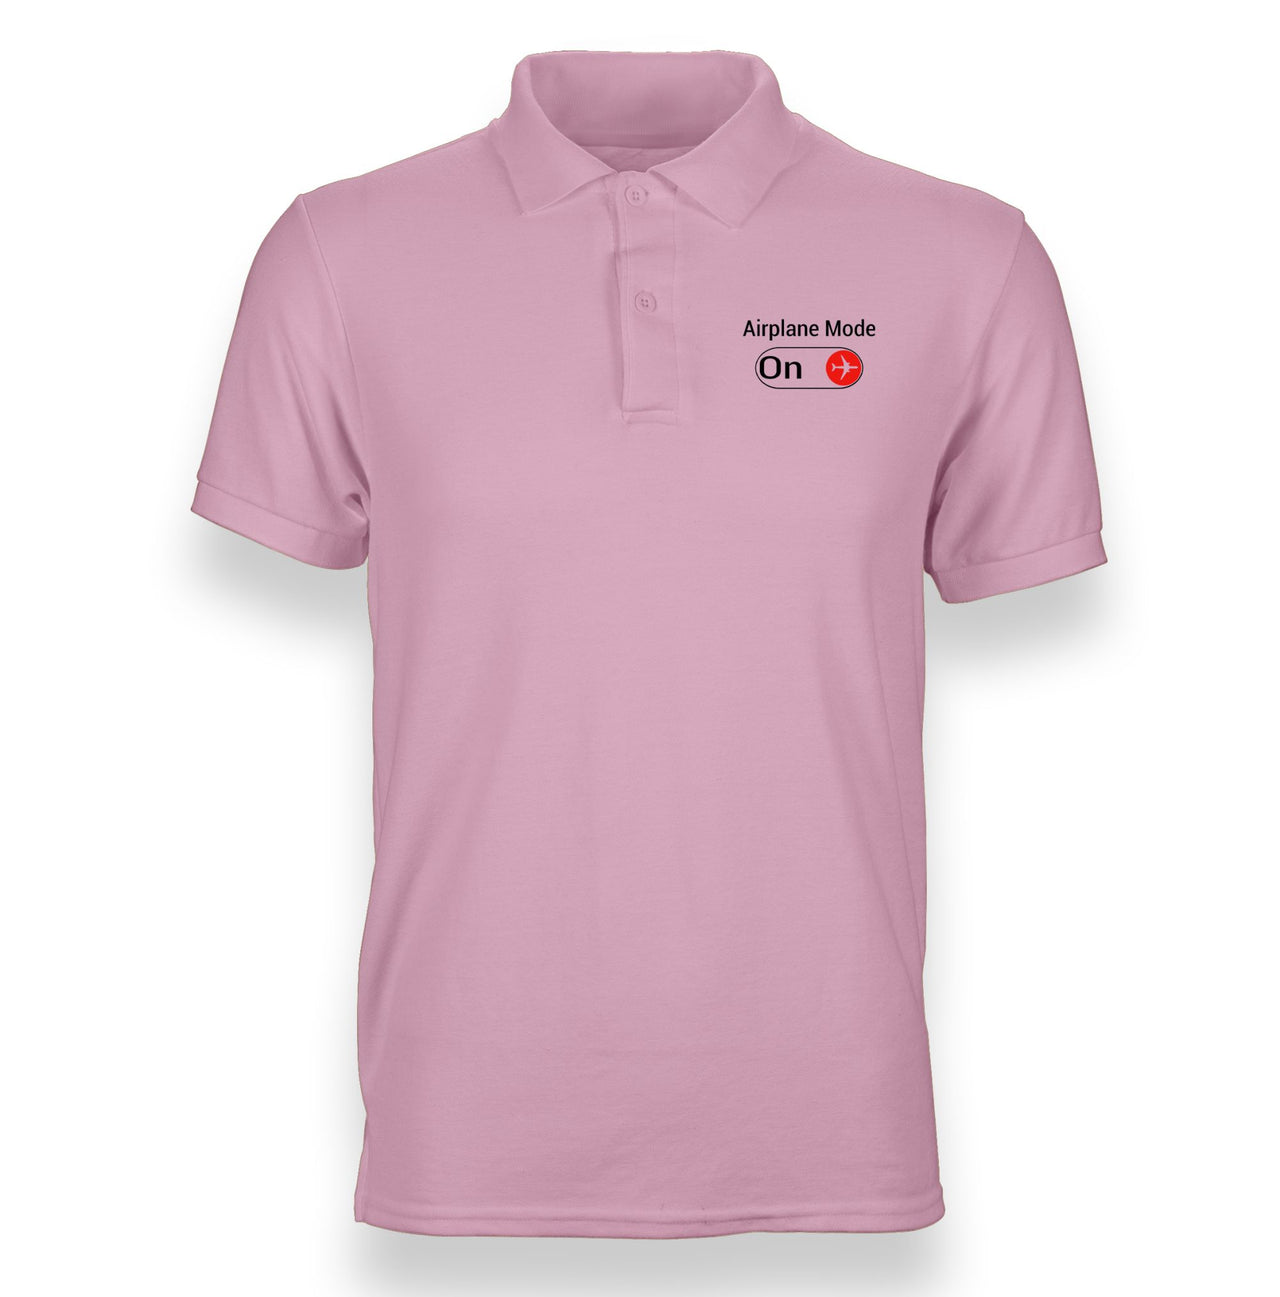 Airplane Mode On Designed "WOMEN" Polo T-Shirts